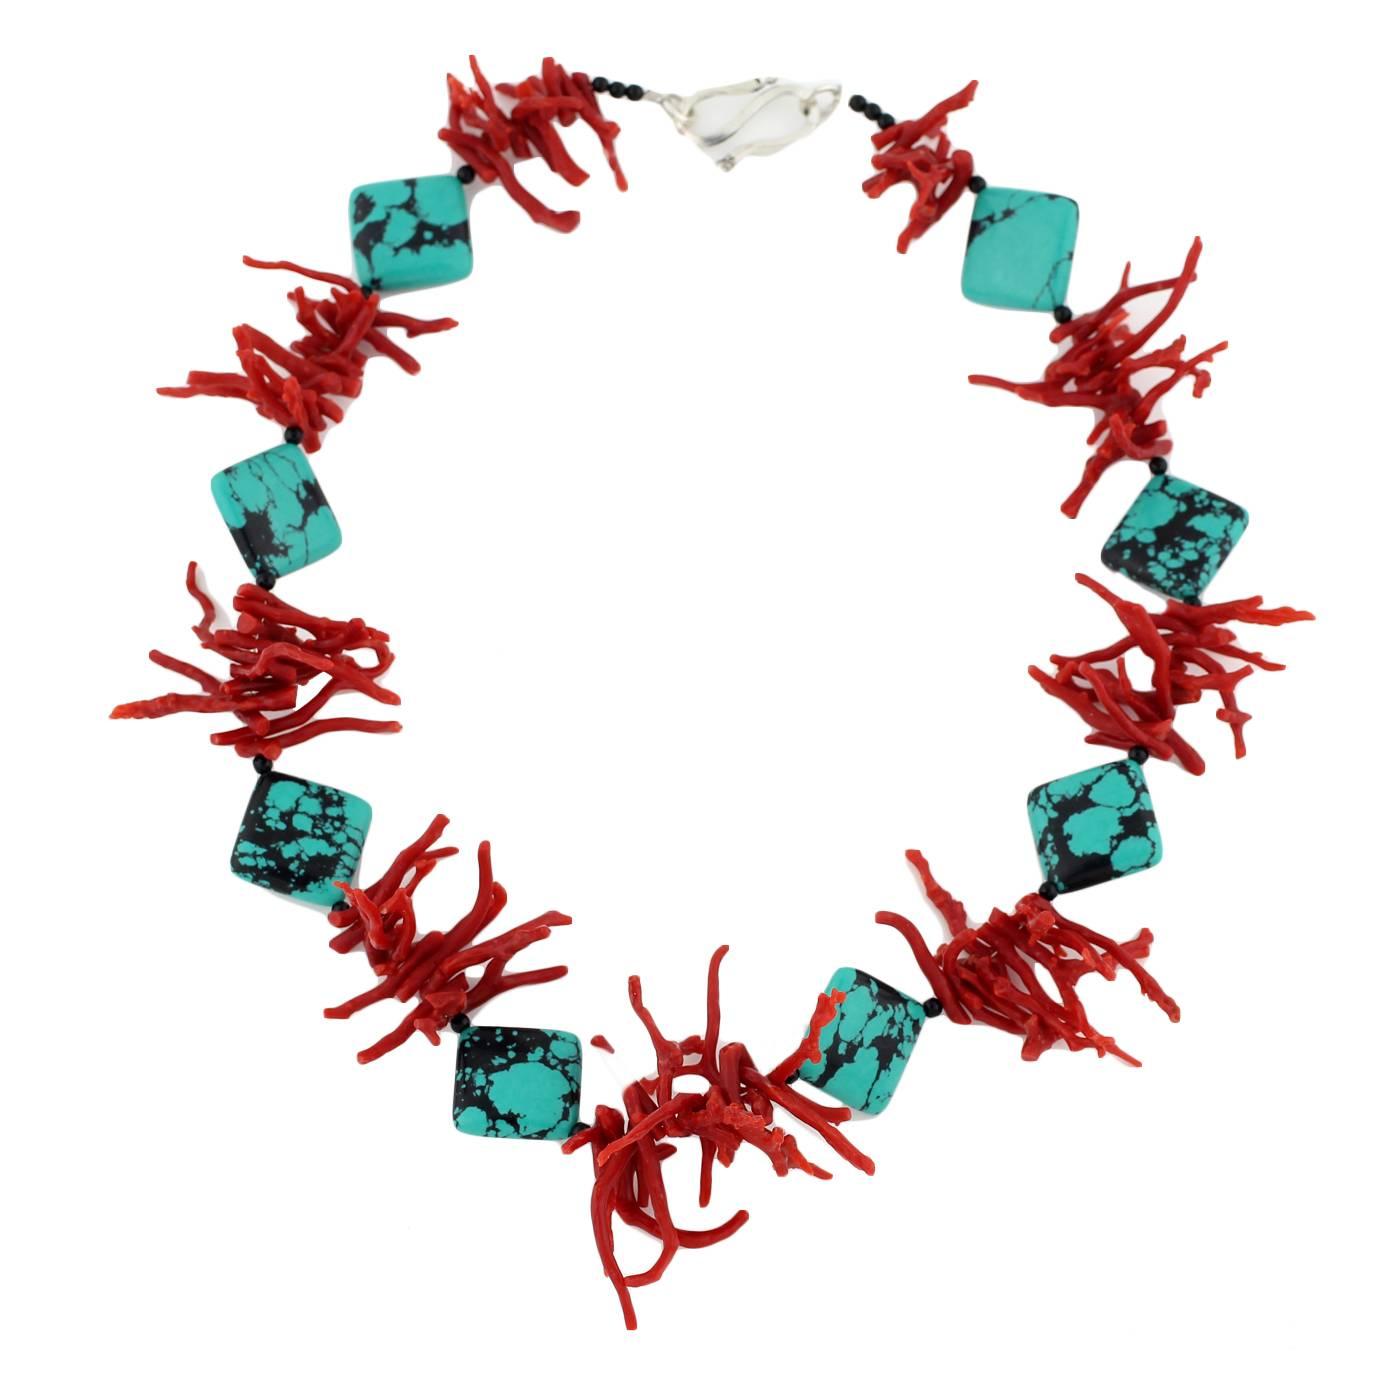 Natural Red Coral Branches enhanced by real American Blue Turquoise Necklace